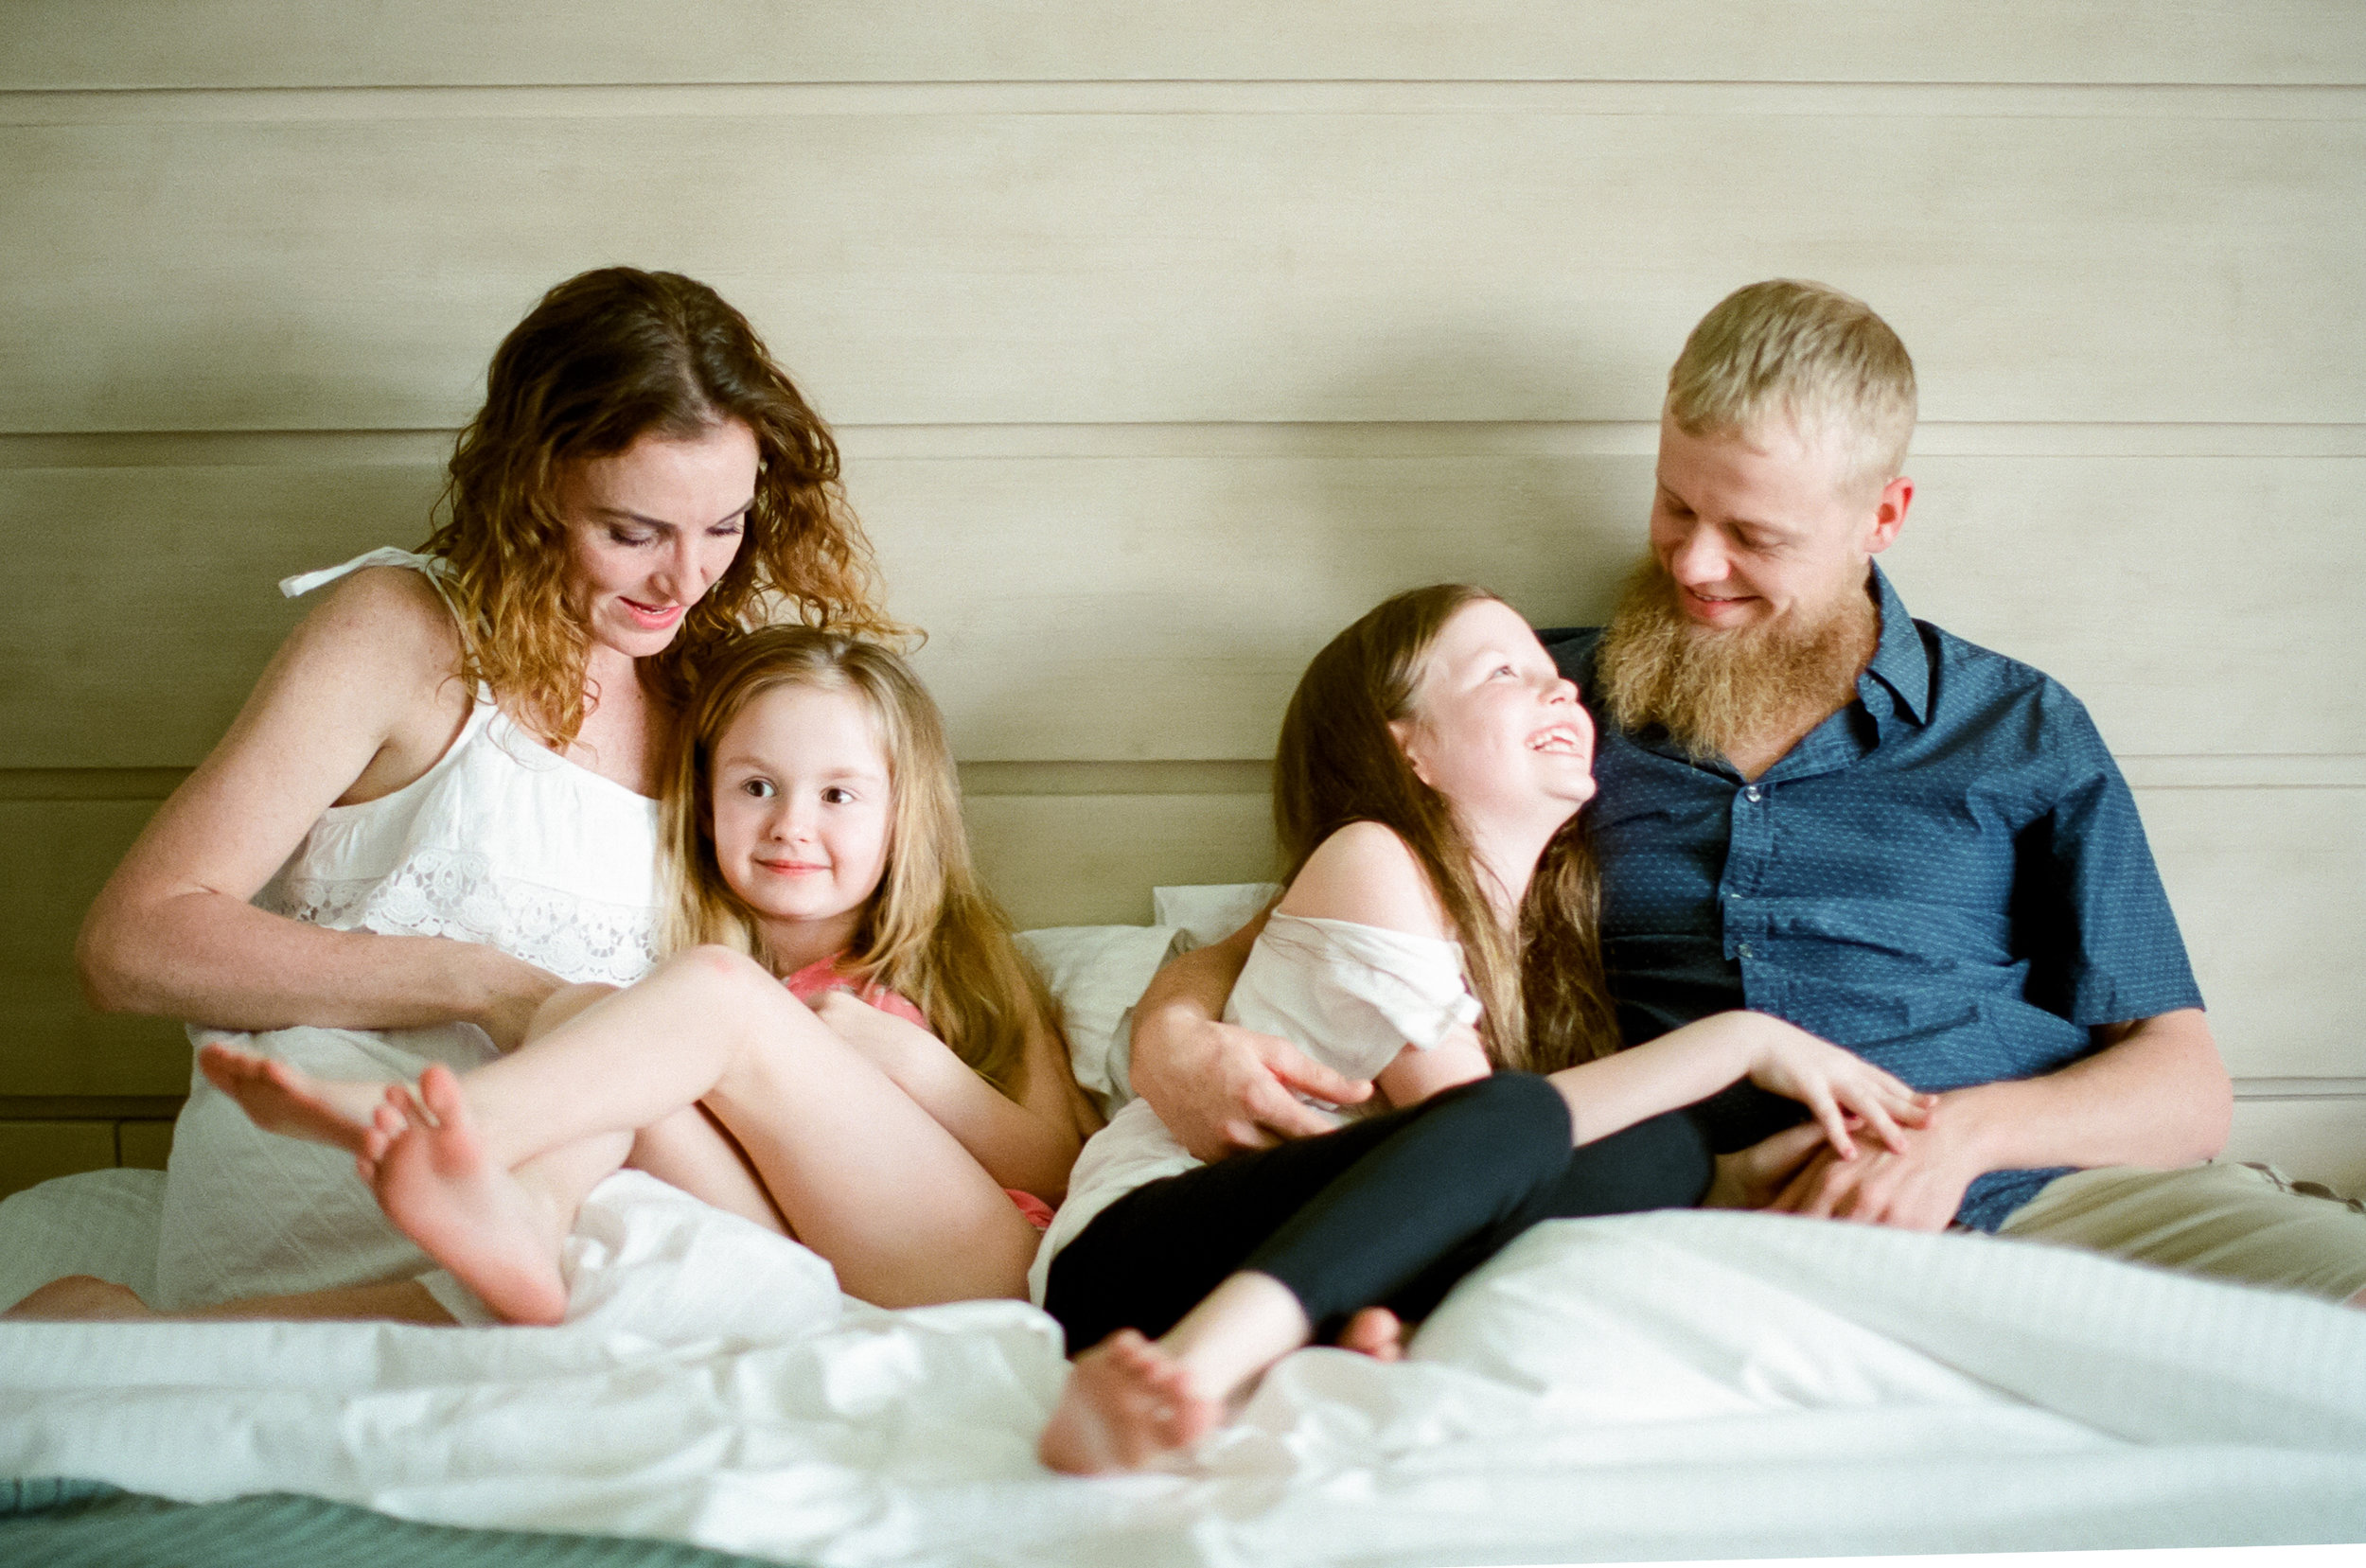 raleigh-film-photographer-home-family-session